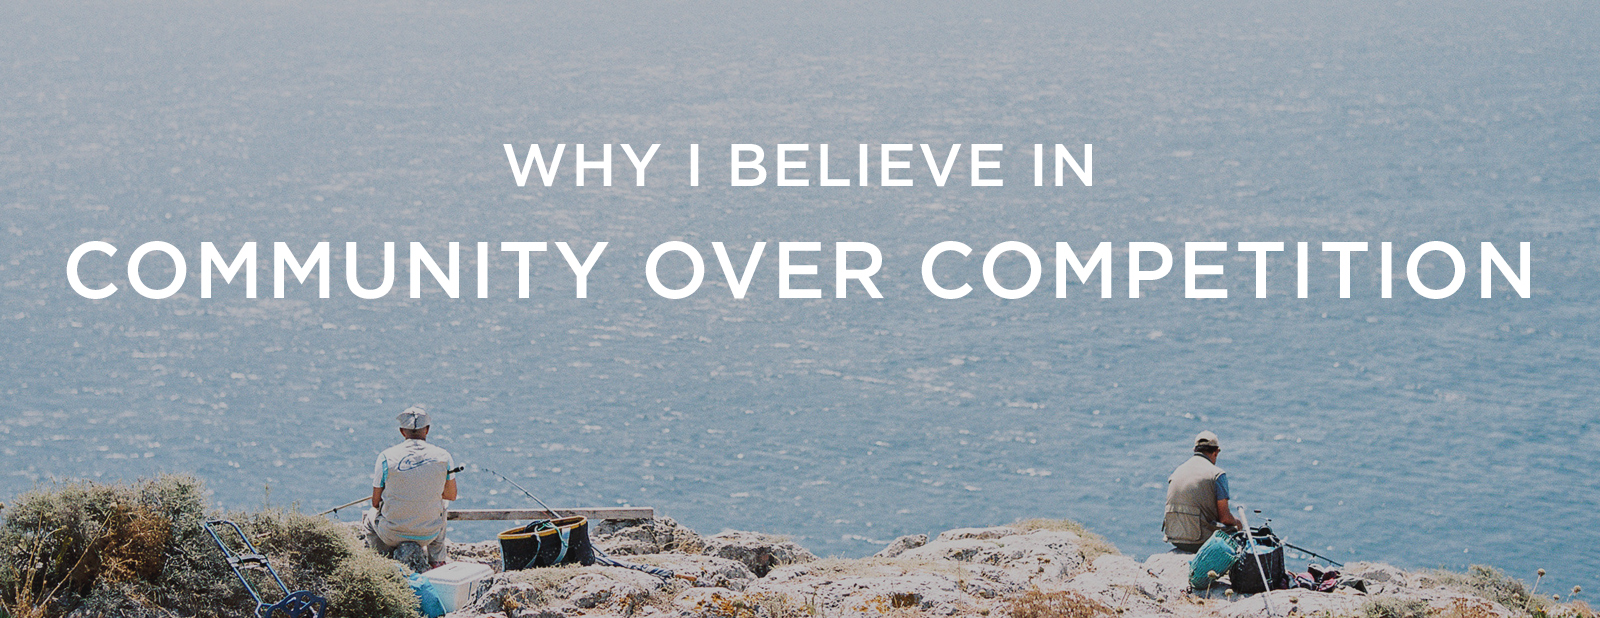 Why I believe in community over competition | via the Rising Tide Society